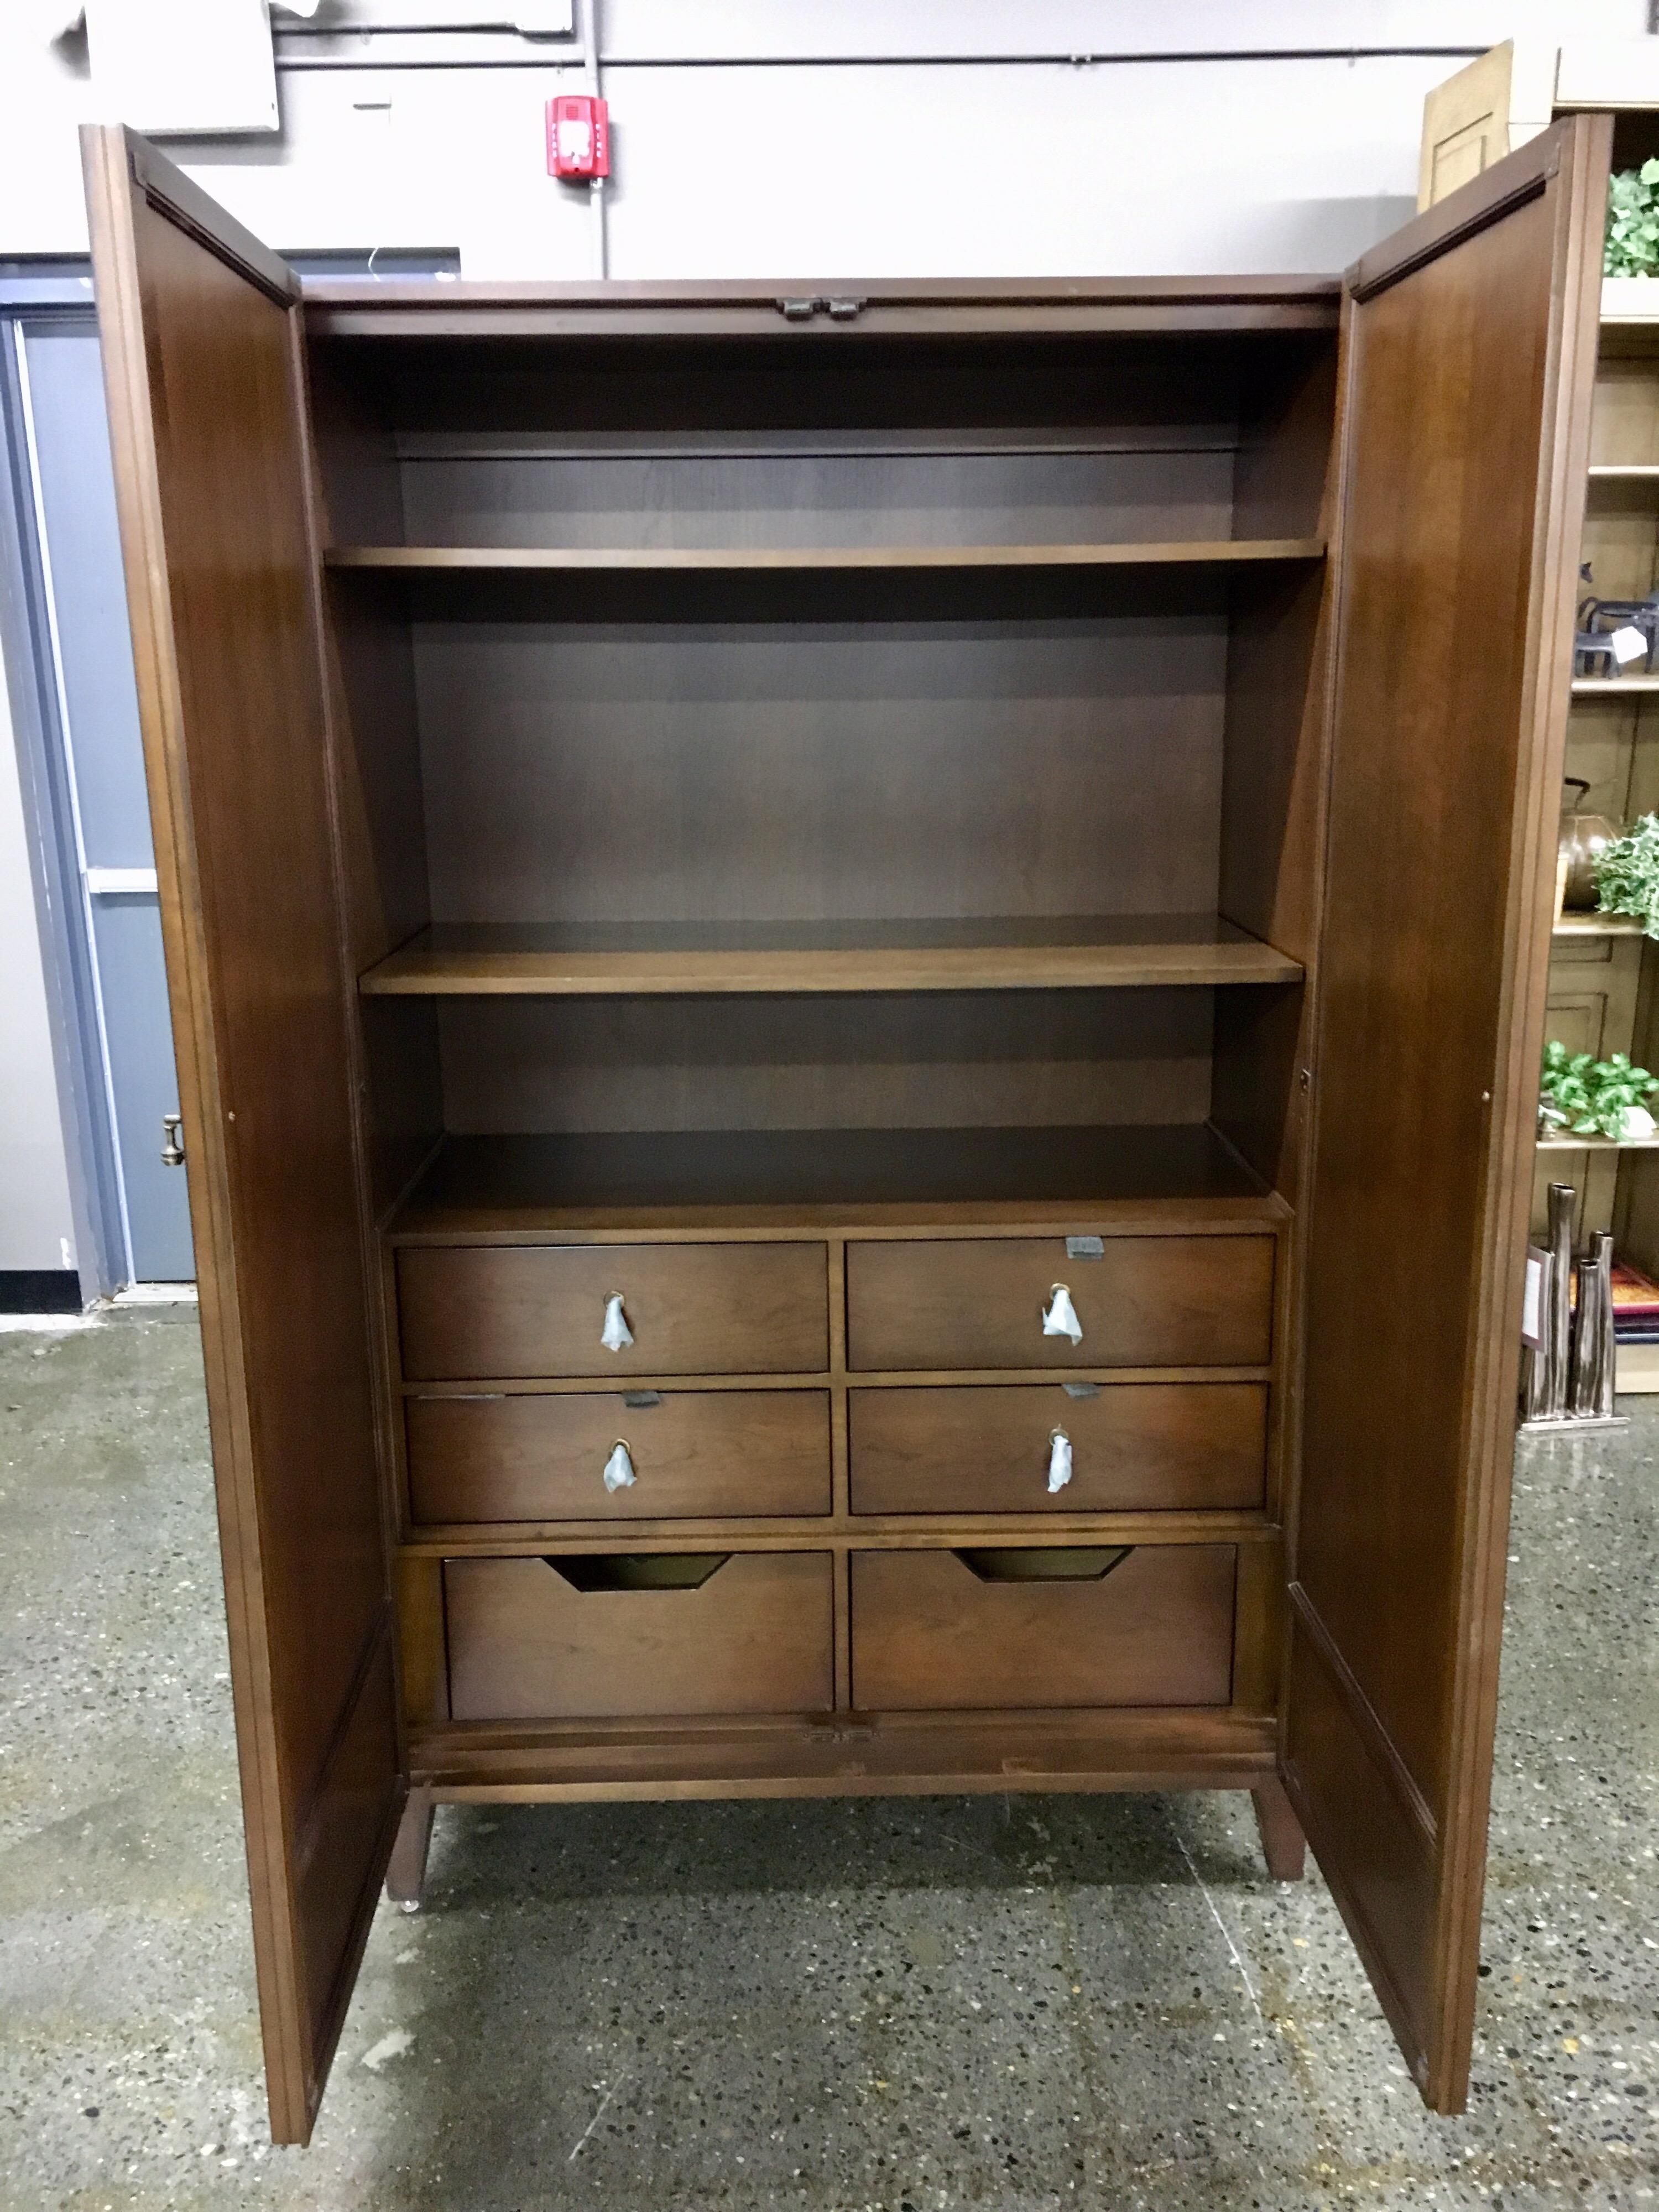 Hickory Chair Furniture Mirrored Armoire Cabinet Credenza Breakfront Sideboard 9